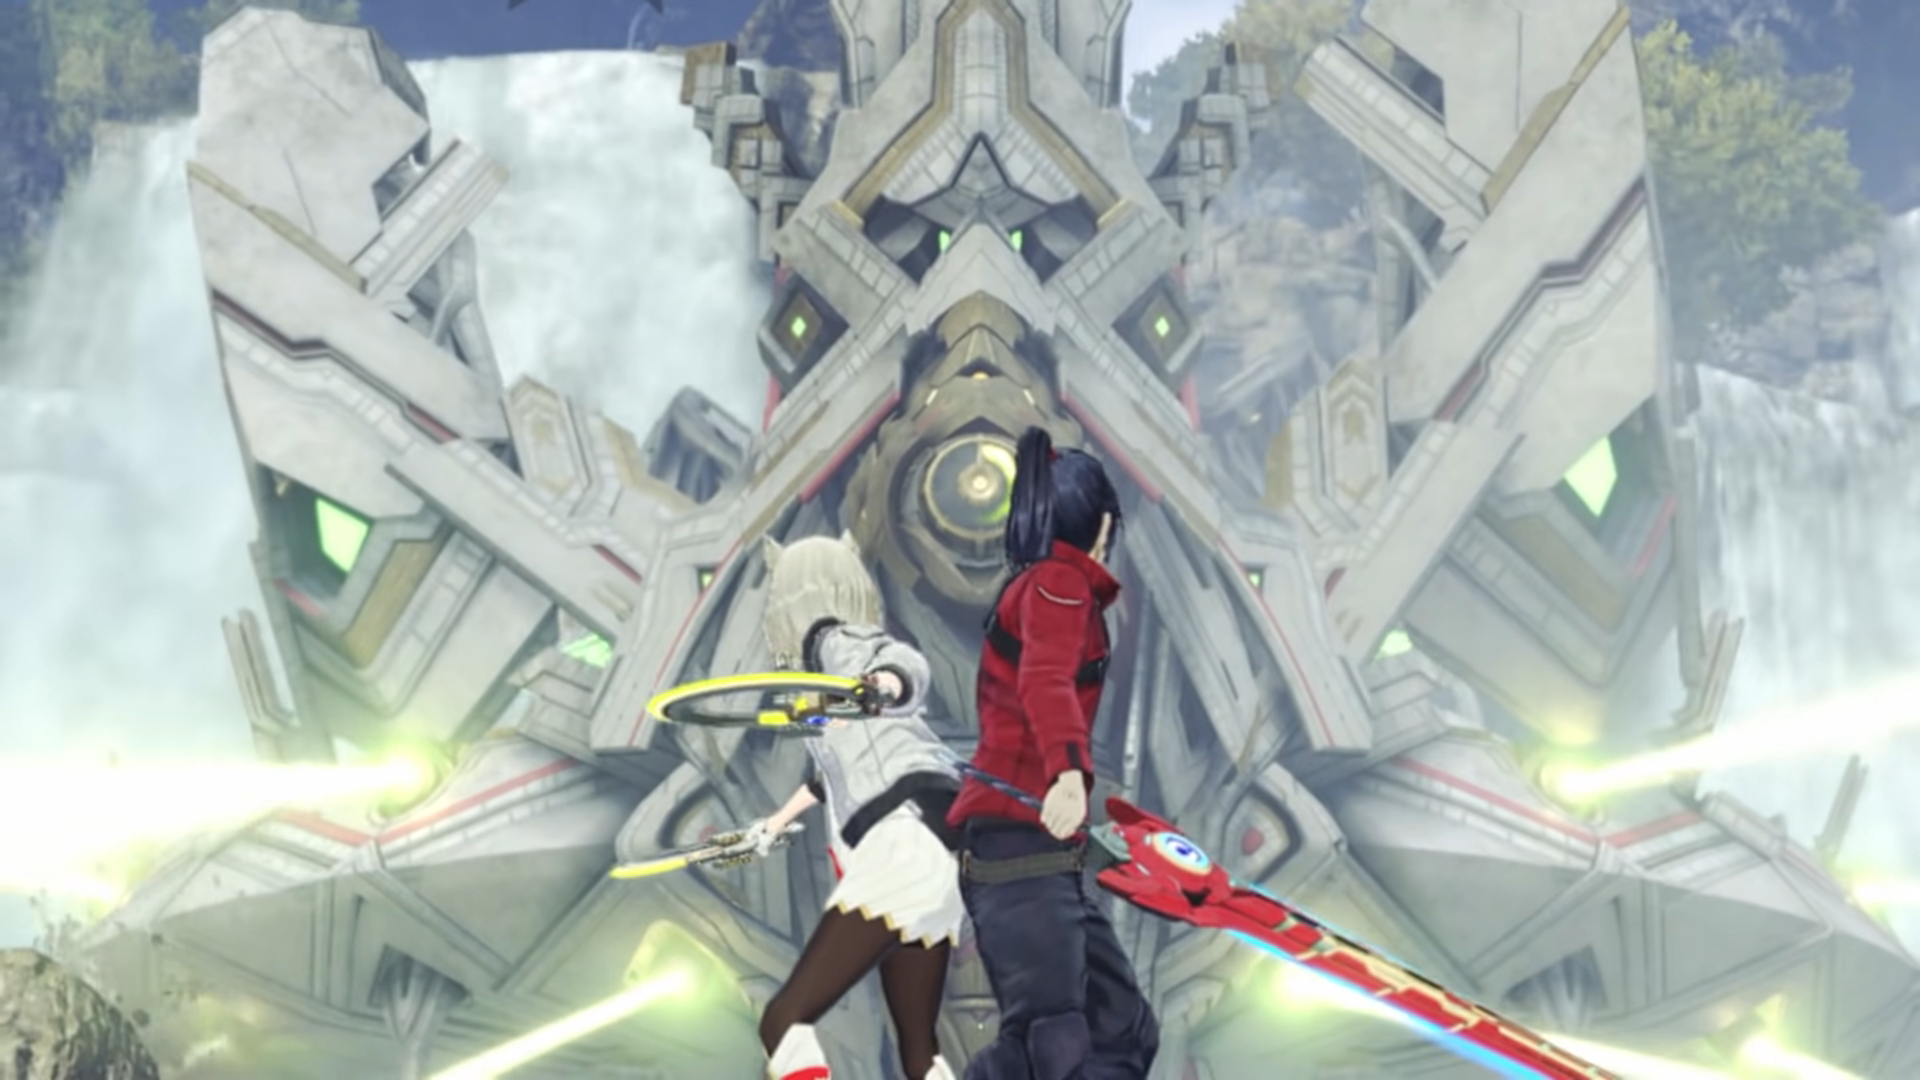 Xenoblade Chronicles 3 tips and tricks to get started  Planet Concerns